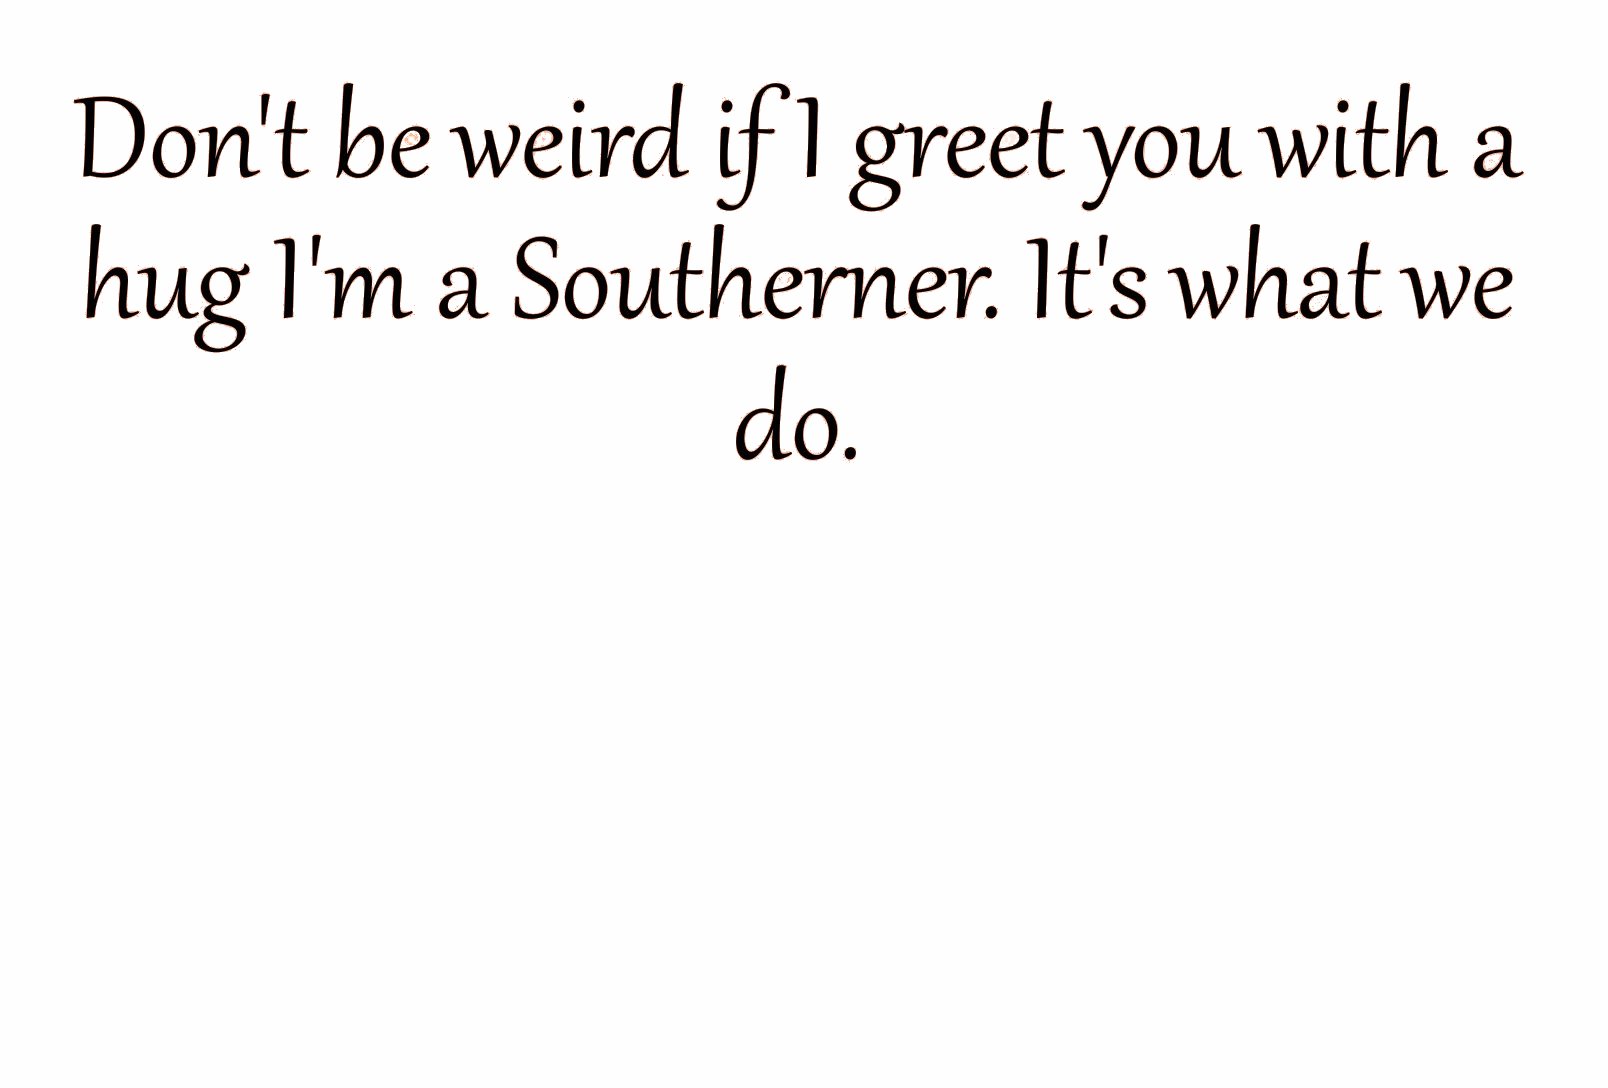 angle - Don't be weird if I greet you with a hug I'm a Southerner. It's what do.